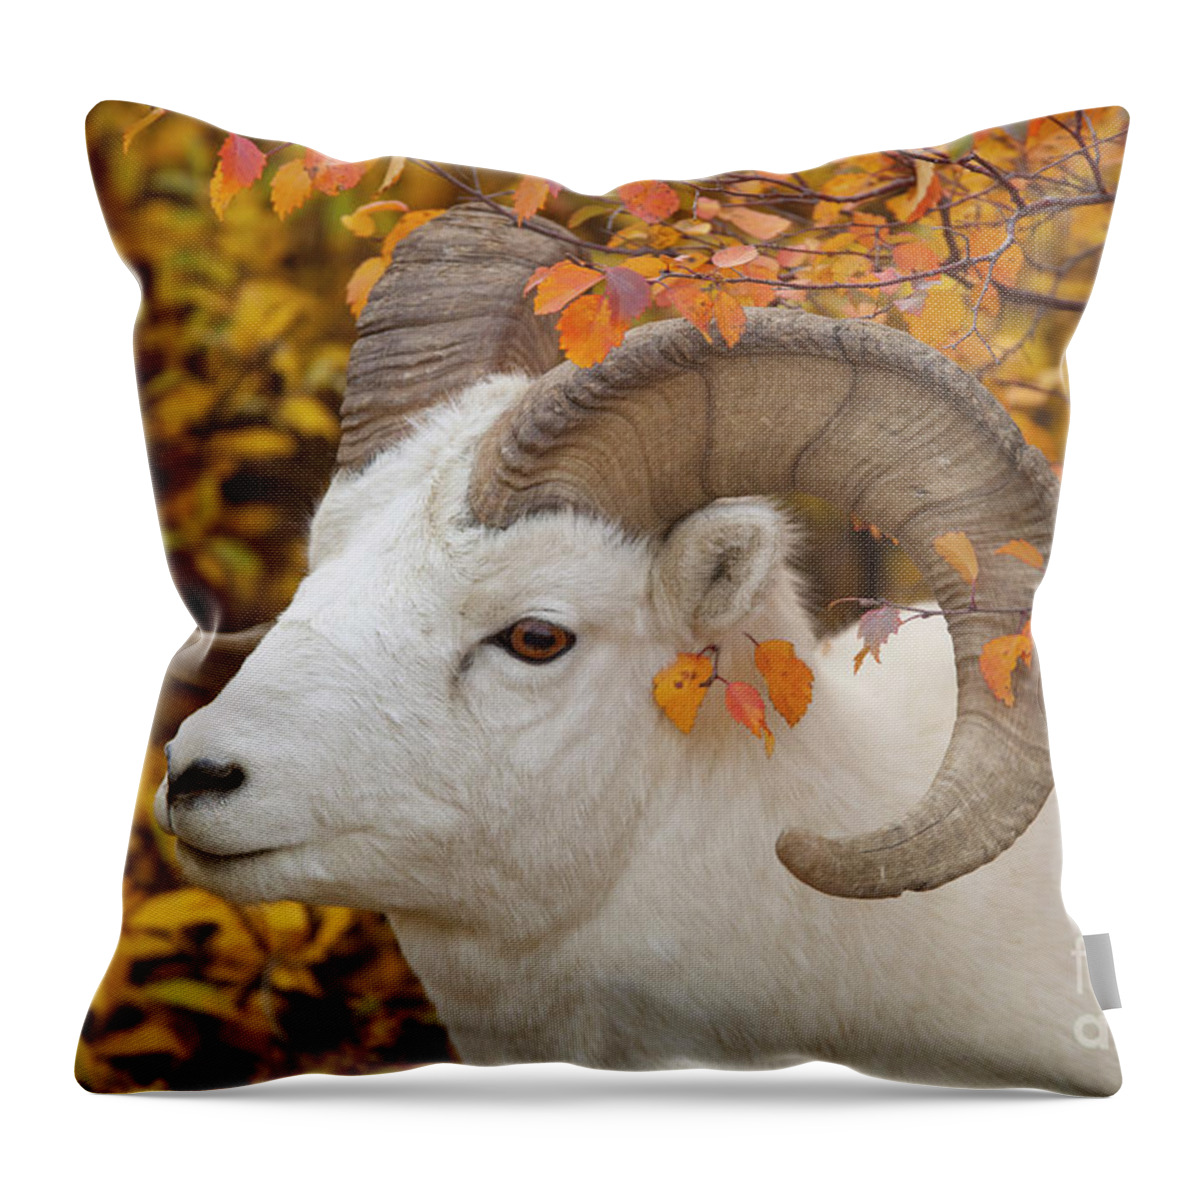 00440933 Throw Pillow featuring the photograph Dalls Sheep Ram in Denali by Yva Momatiuk and John Eastcott